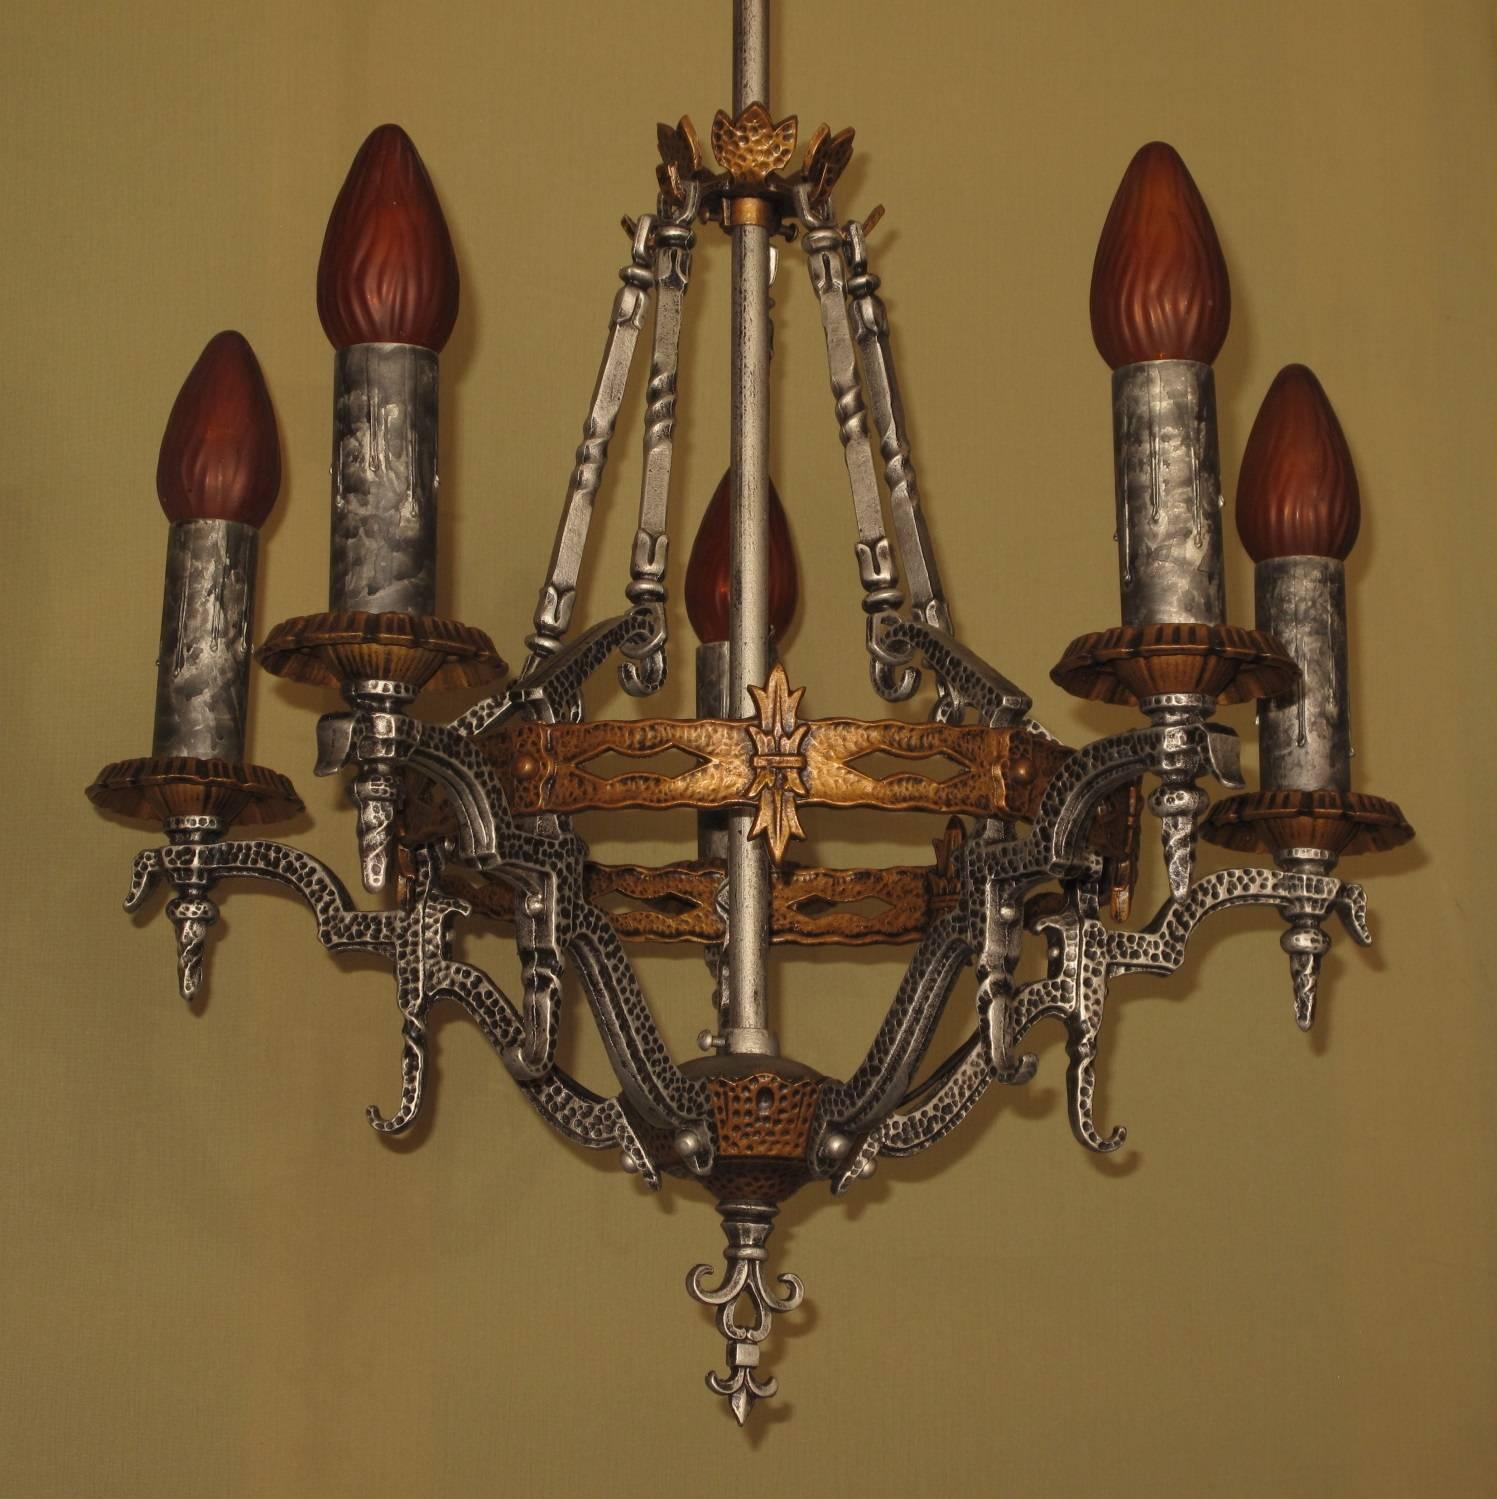 Spanish Colonial Spanish Revival Ceiling Fixture, 1920s For Sale